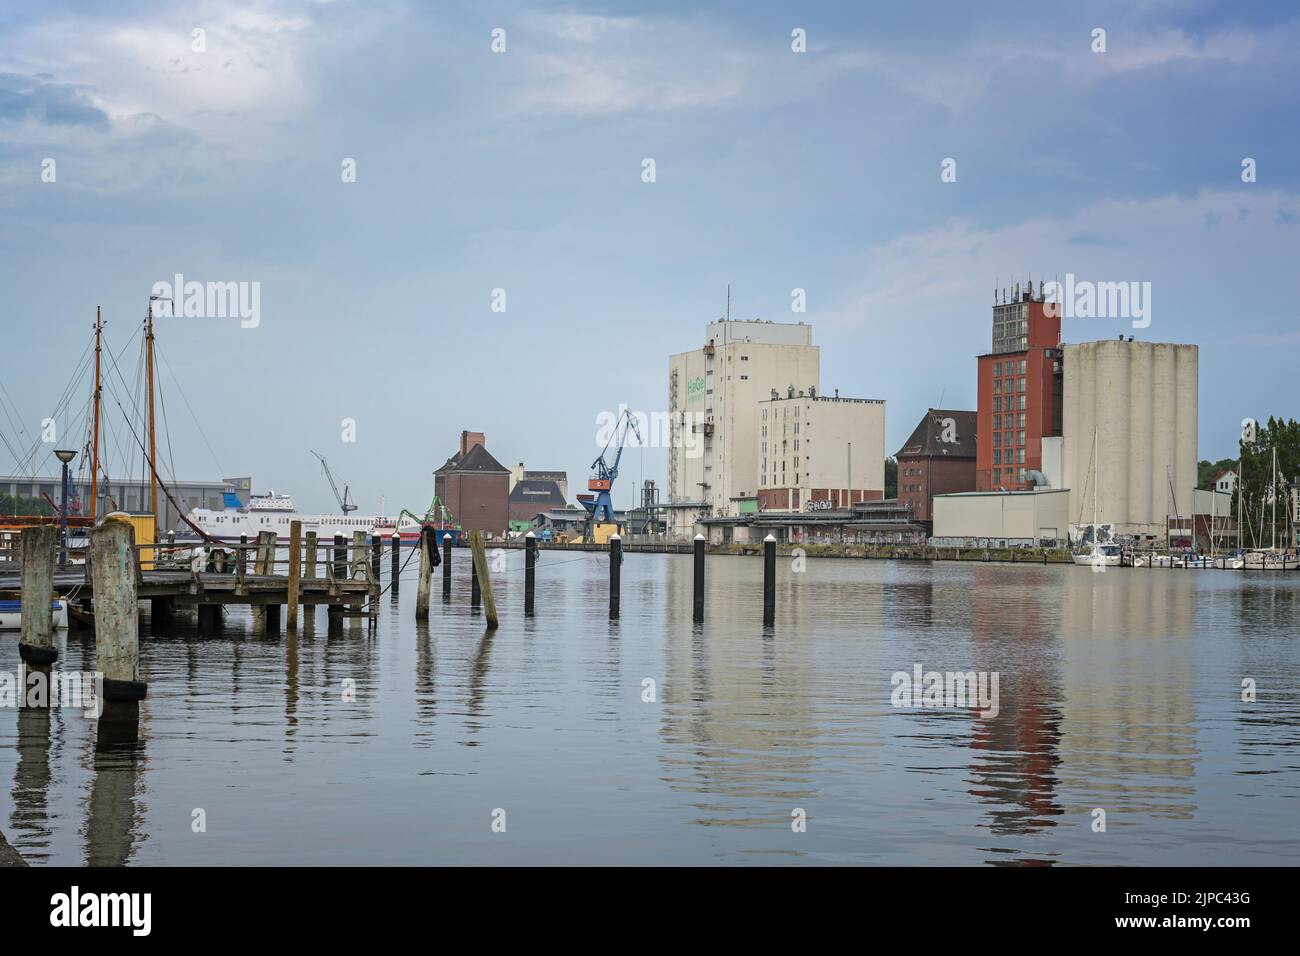 Flensburg, Germany, July 25, 2022:  Industrial city port with the large HaGe building (agricultural cooperative nord) and other silos on the Flensburg Stock Photo